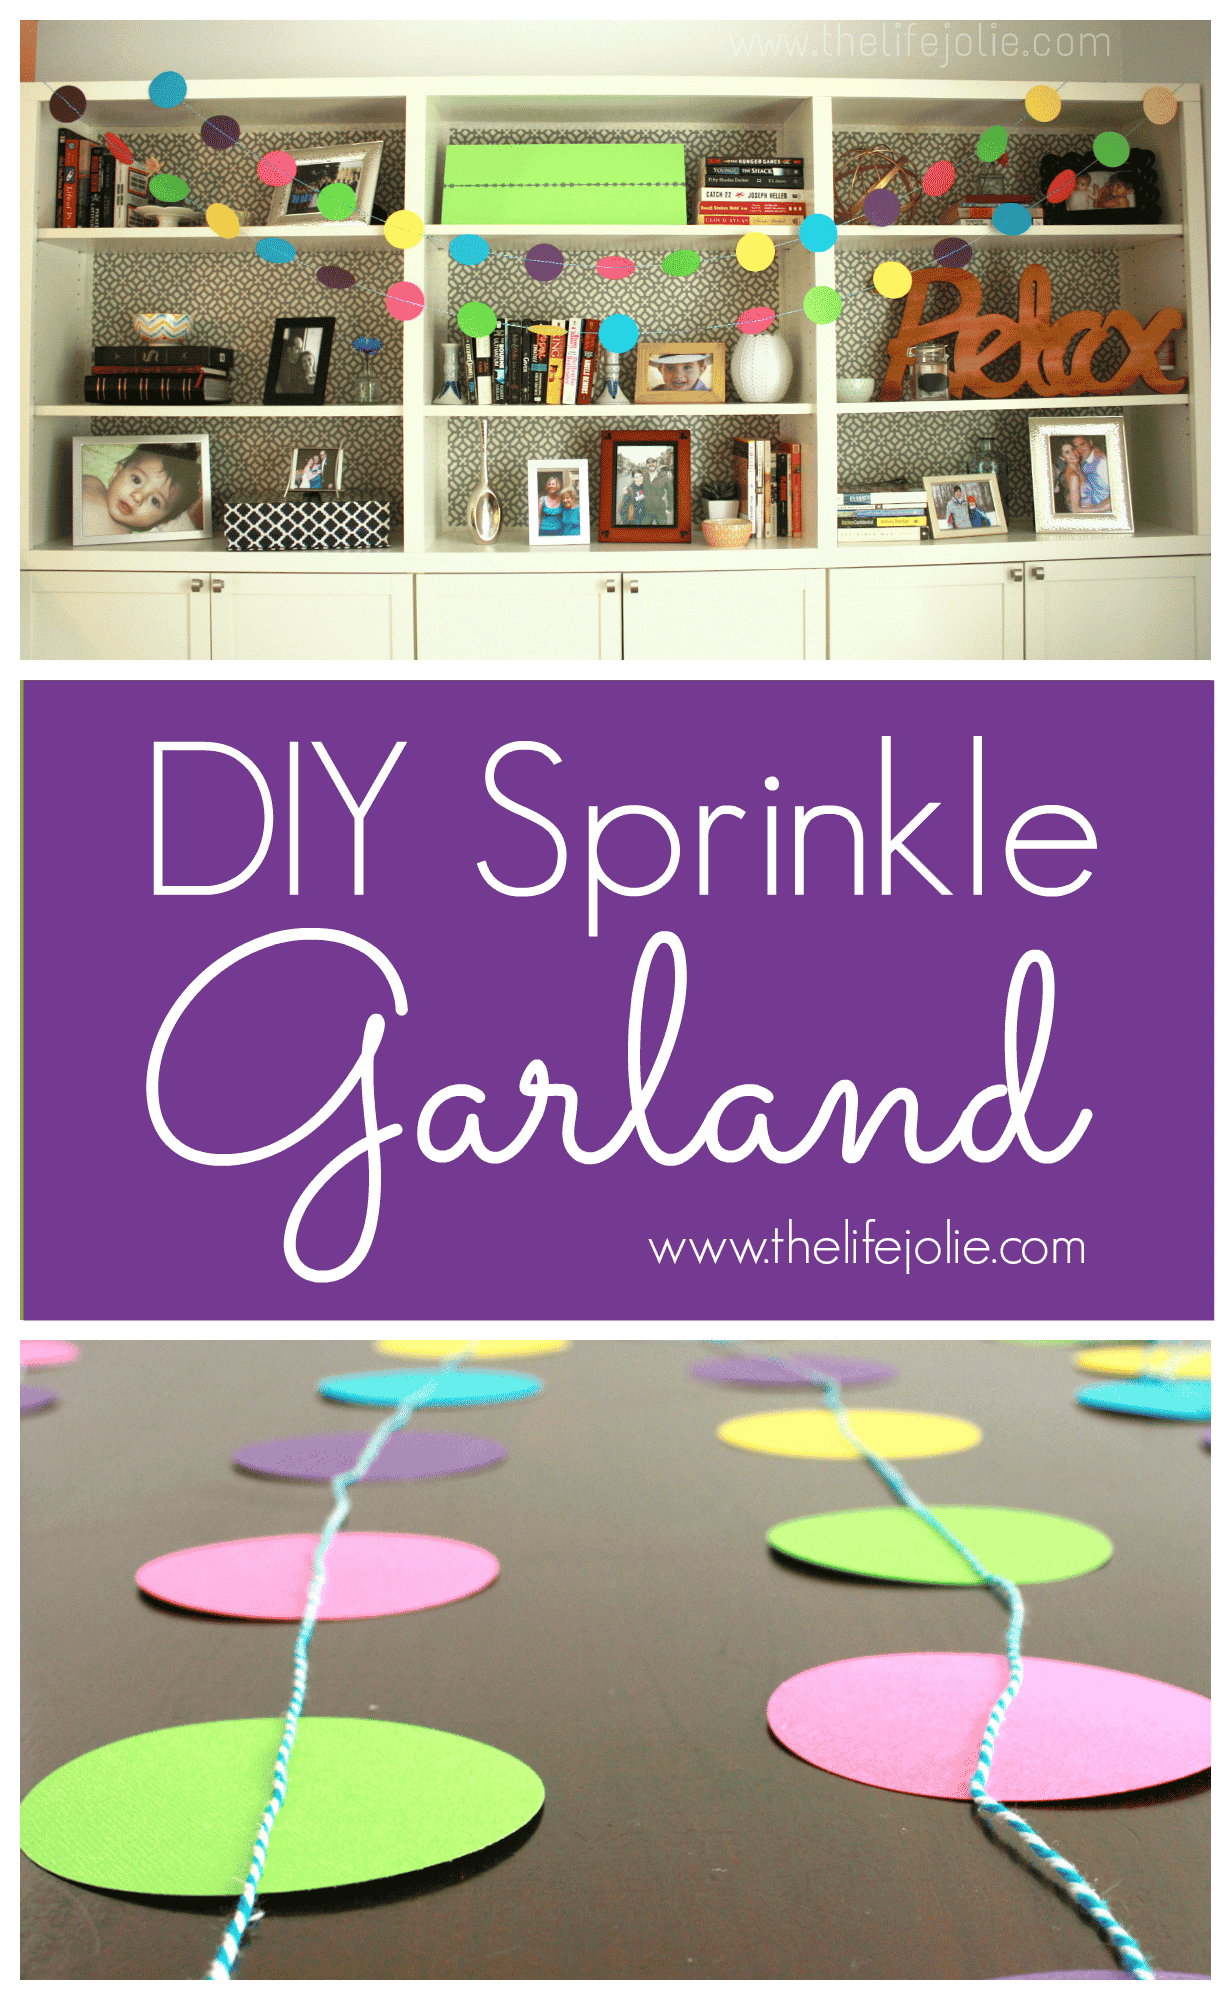 This tutorial shows you how to make the sweetest DIY Dot Garland- perfect for any special party or event, or even just for decorating your home. It's quick, easy, cost-efficient and so darn cute!